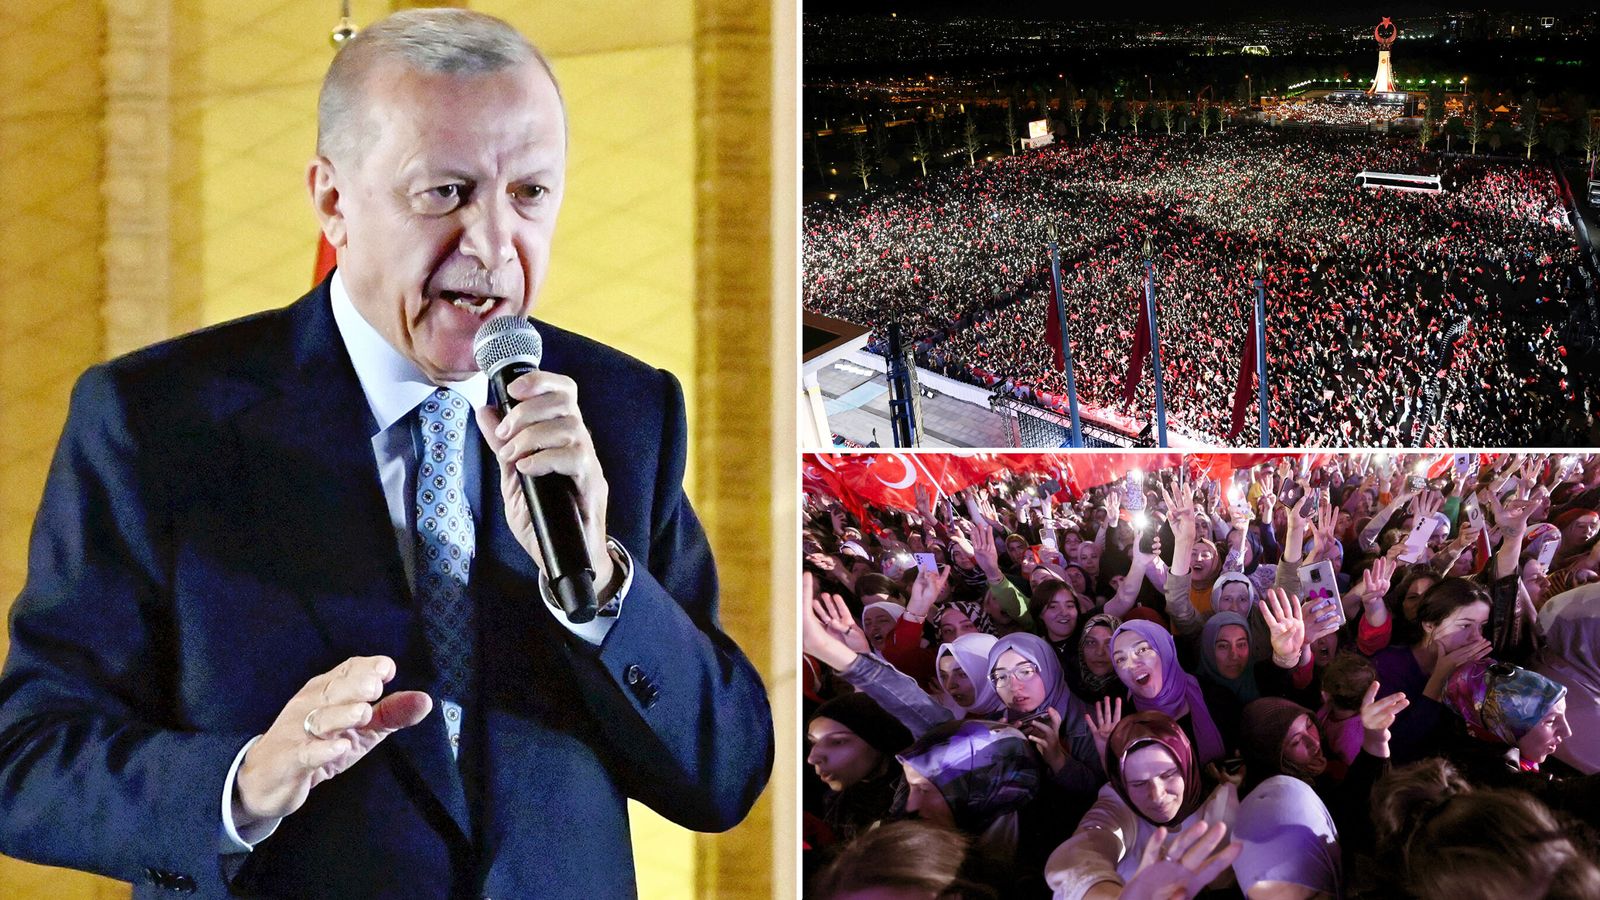 Erdogan Secures Third Term as President, Praised by World Leaders in Election Run-Off Win